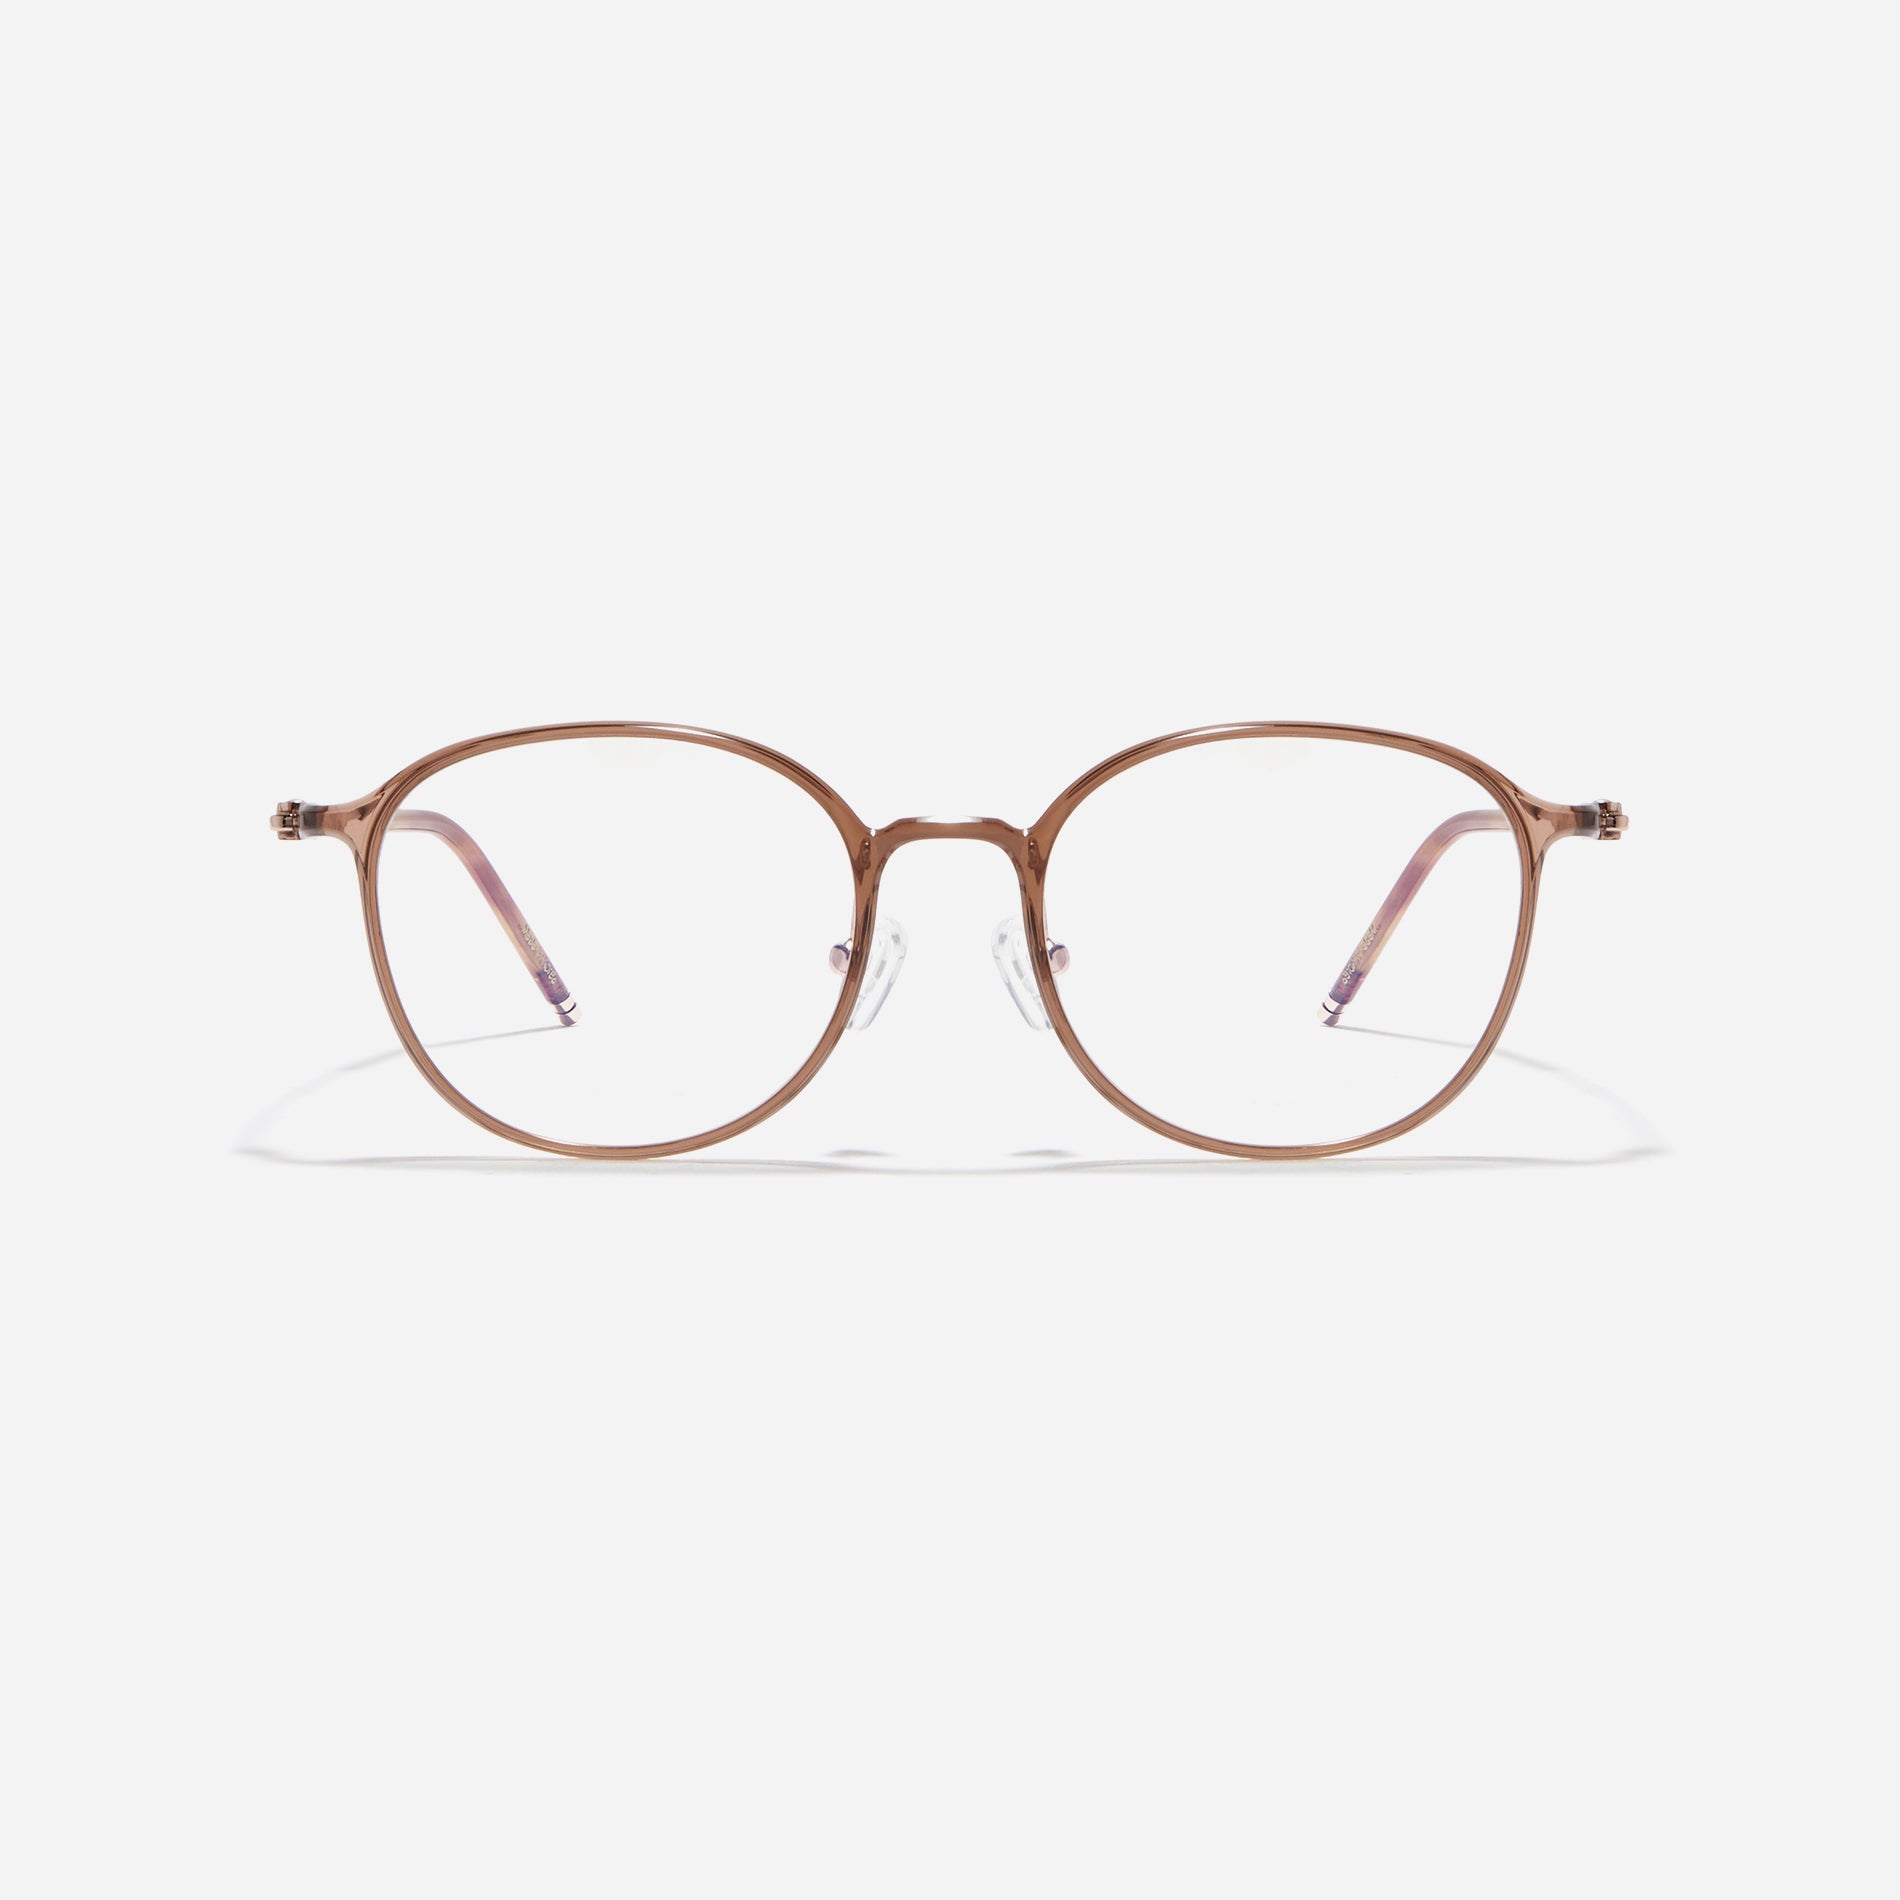 Ultra-lightweight round square-shaped eyeglasses crafted using cutting-edge materials sourced from the French company ARKEMA. These glasses offer robust durability and consistently comfortable fit.